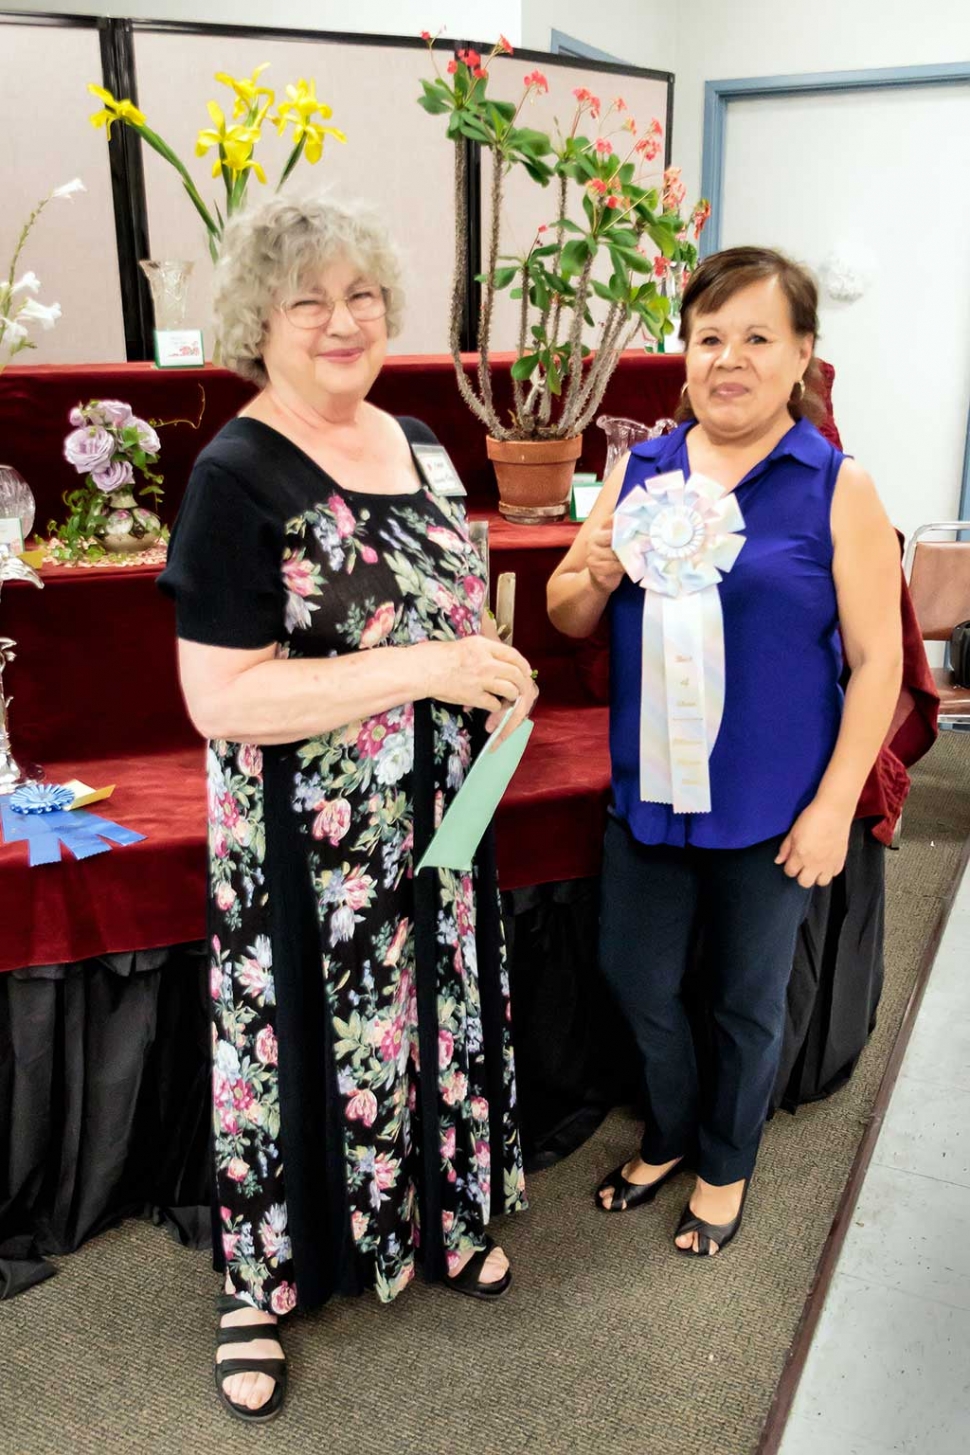 (l-r) Joanne King with this year’s Grand Prize Winner Bene Ambrosio for her potted plant “Crown of Thorns.”